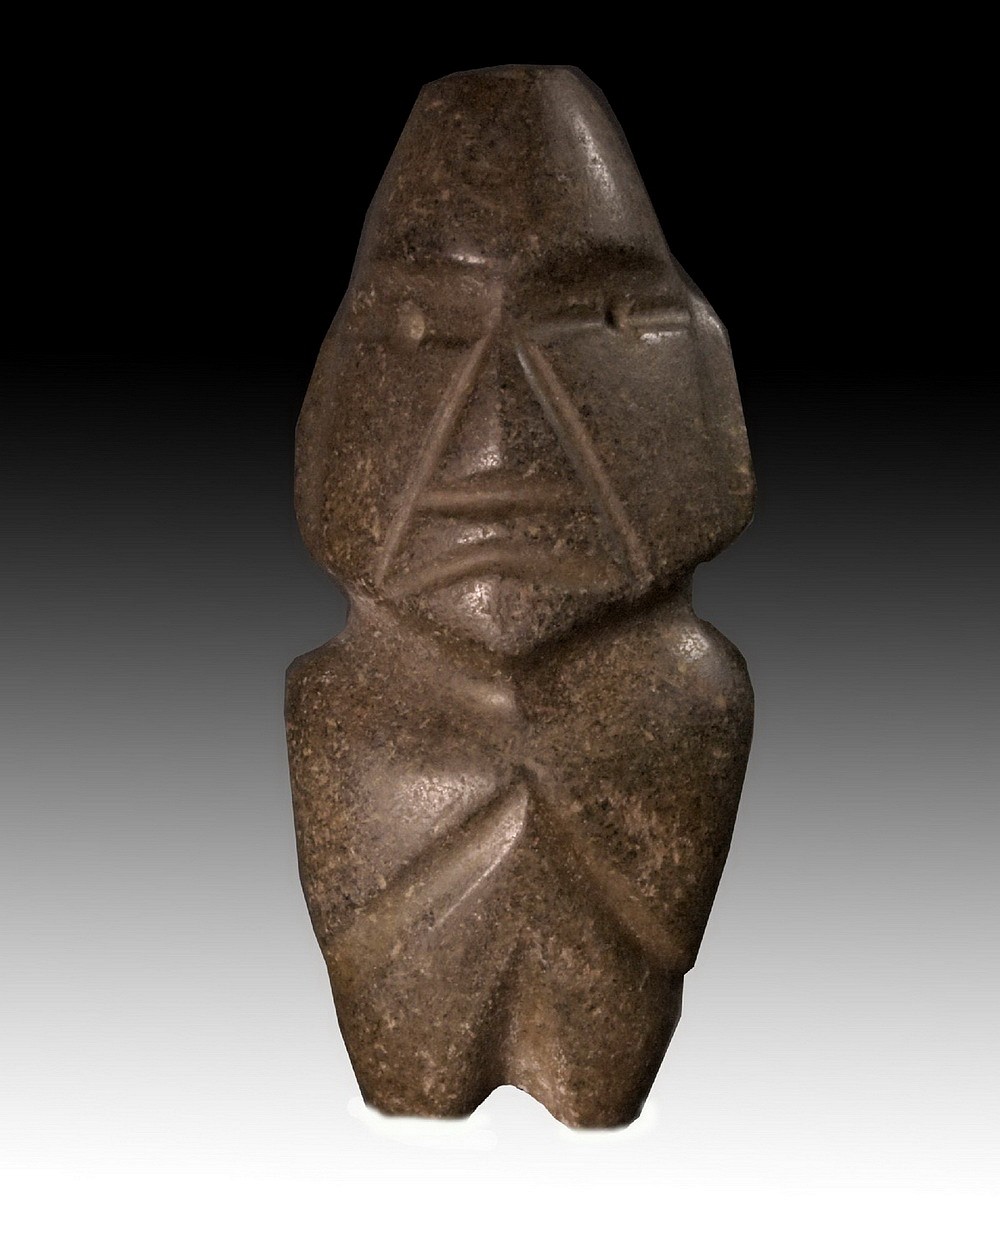 Mexico, Classic Brown Stone Mezcala Figure of the M8 Type
This hand-held stone figure fits perfectly in the palm of the hand and bears a distinctive facial expression with round eyes and a triangular frowning mouth.  The figure was created using the string-sawing technique and is made of a greenish grey stone with earth brown striations.  It was highly polished.  The figure has its arms to the side, represented by carved grooves, and linear carved face, which are both characteristics of Type M10 Mezcalas.  The representation of human figures played an important role in Mezcala culture, including in rituals and burial sites.  However, most of these figures, were used for utilitarian purposes as celts or chisels.  For a reference see the Primitive Museum of Art's MEZCALA STONE SCULPTURE: THE HUMAN FIGURE, p.22-23, and MEZCALA: ANCIENT STONE SCULPTURE FROM GUERRERO MEXICO, by Carlo Gay and Frances Pratt. Ex. Gallery Hana-Tokyo, prior to 1970.
Media: Stone
Dimensions: H: 5 in. x 2.33 in.
$5,550
n5057